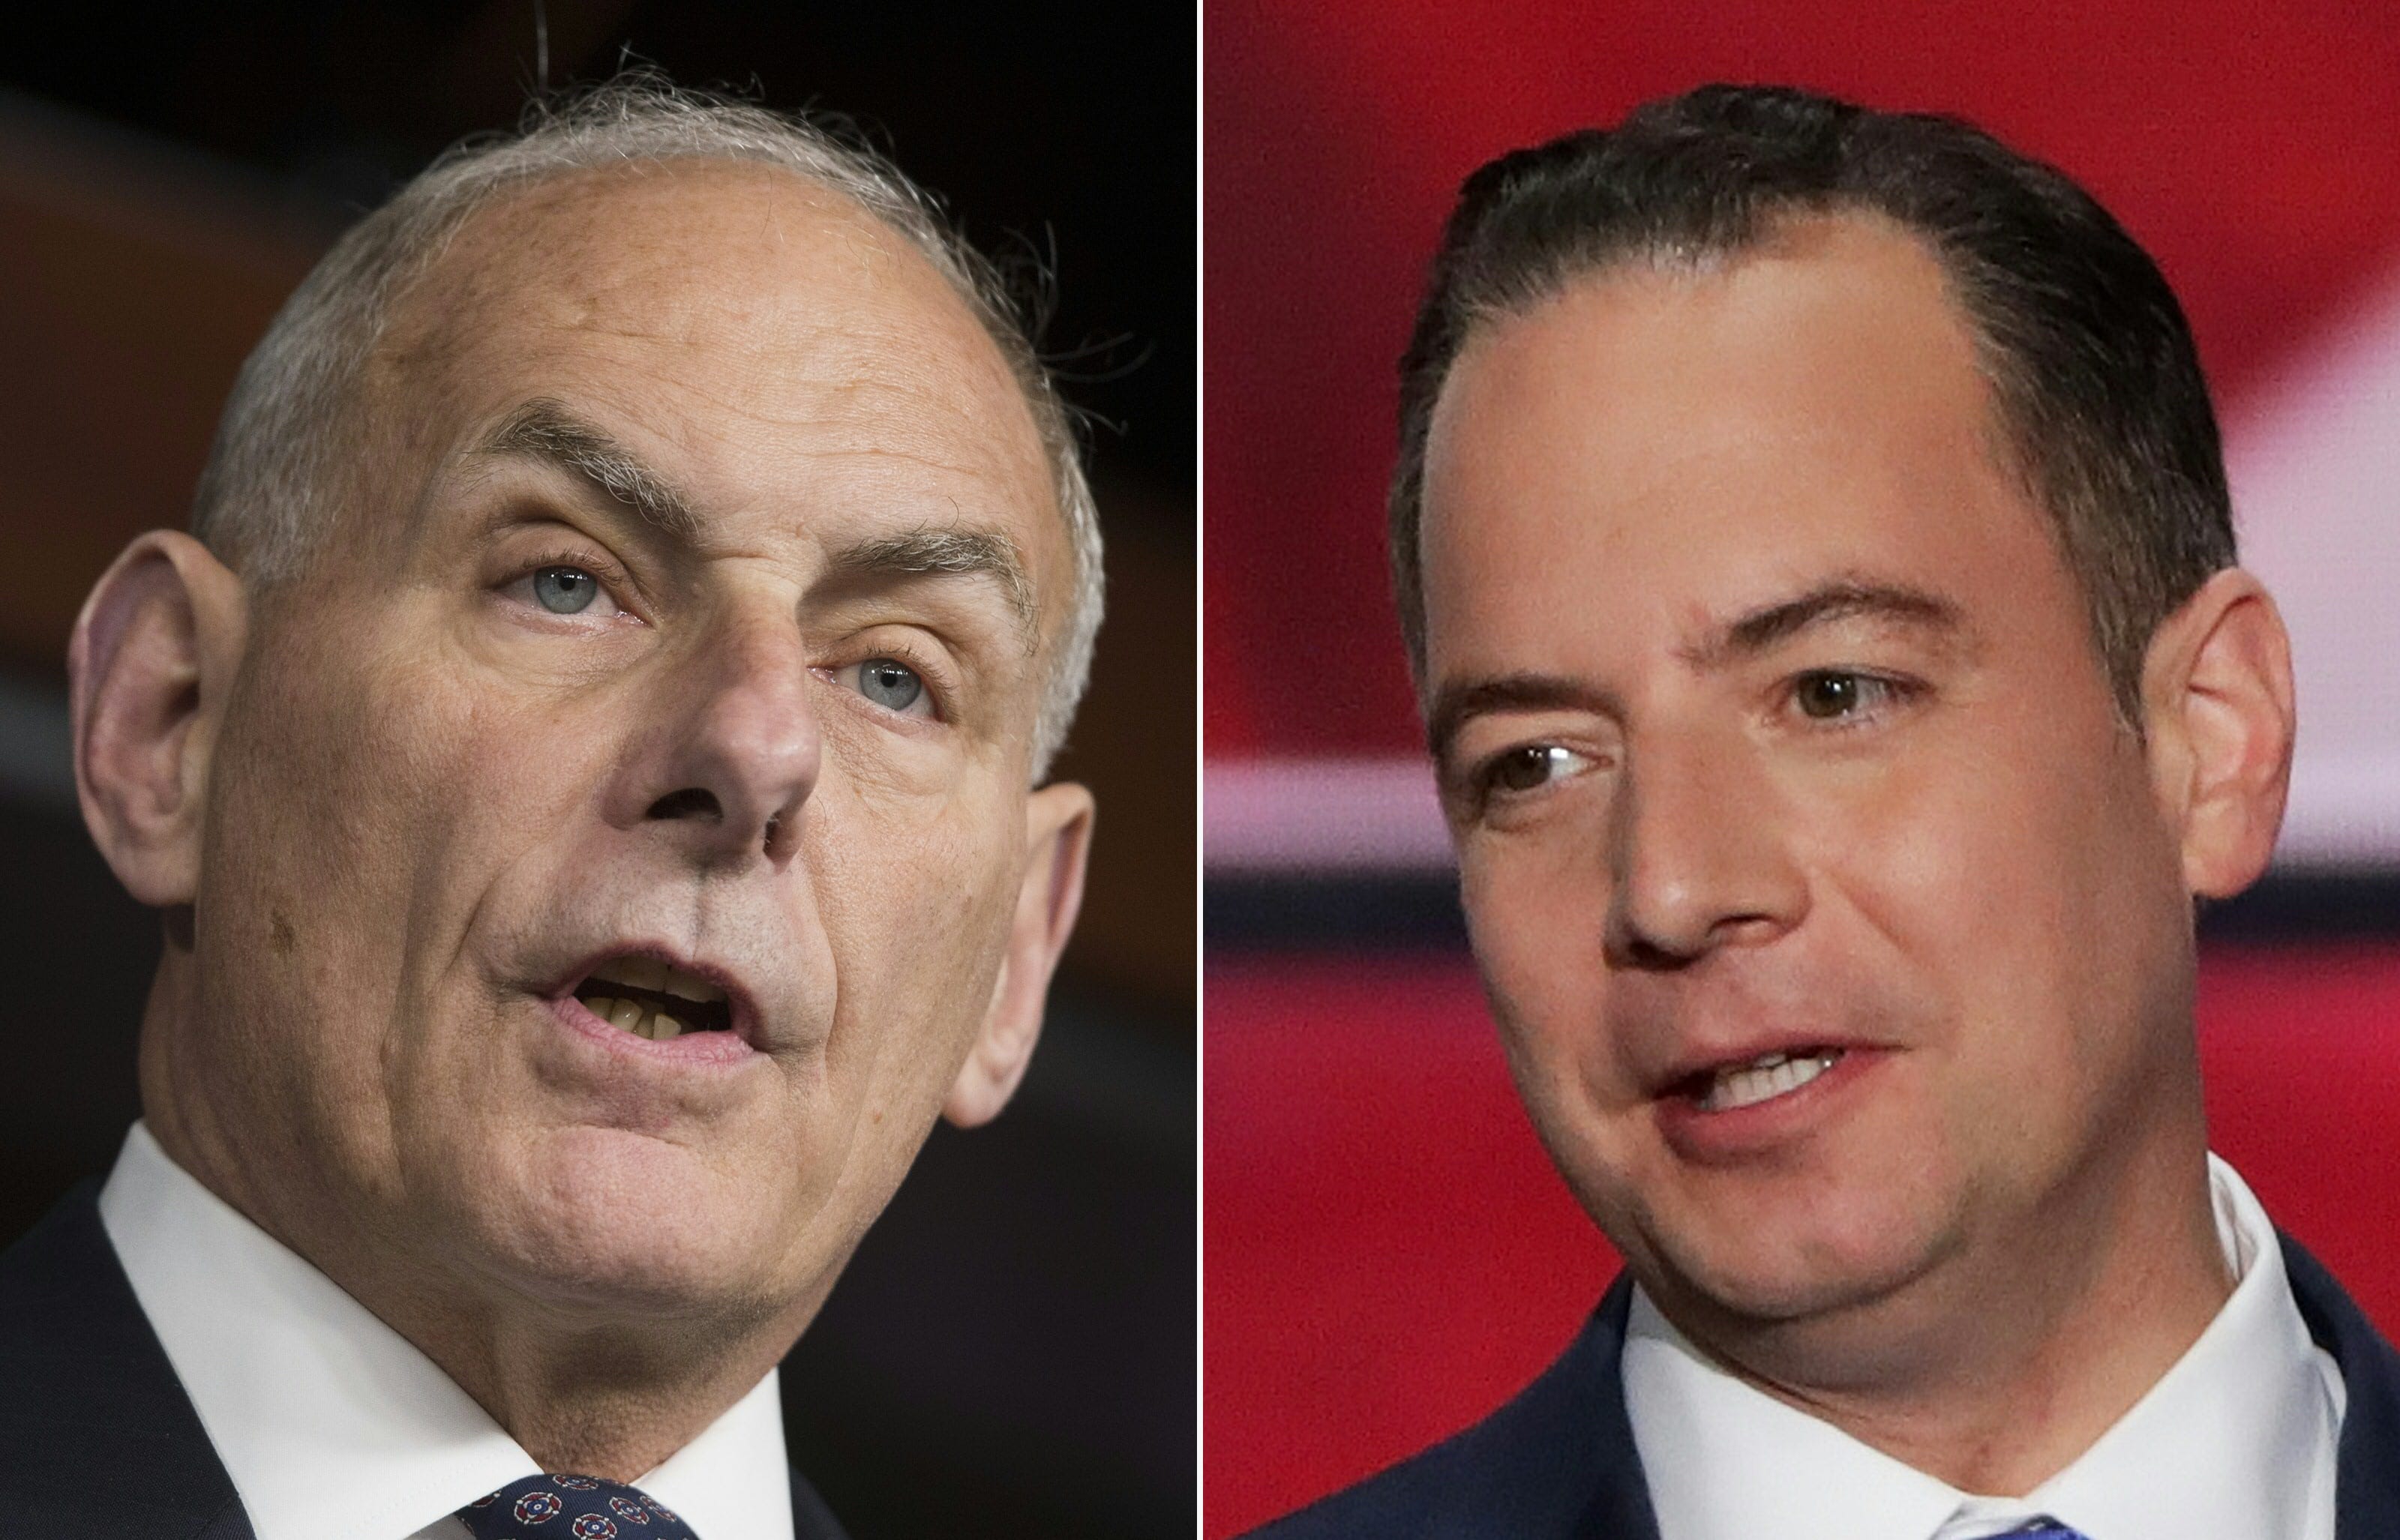 US Secretary of Homeland Security John Kelly will replace Reince Priebus as the WHite House chief of staff.